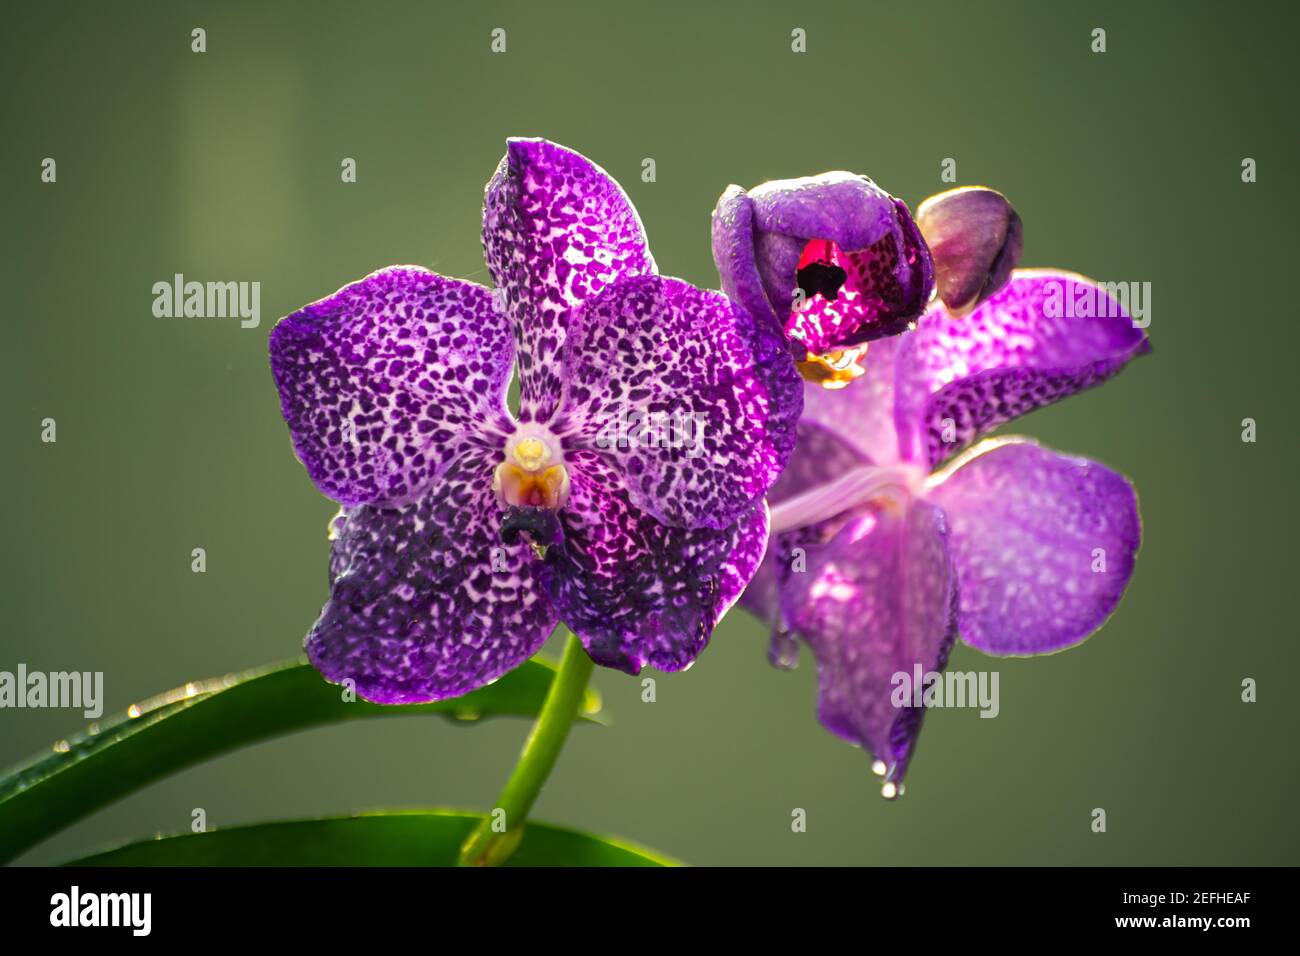 Purple orchid flowers close up photo, morning dew in the large petals against soft yellowish bokeh background, Stock Photo